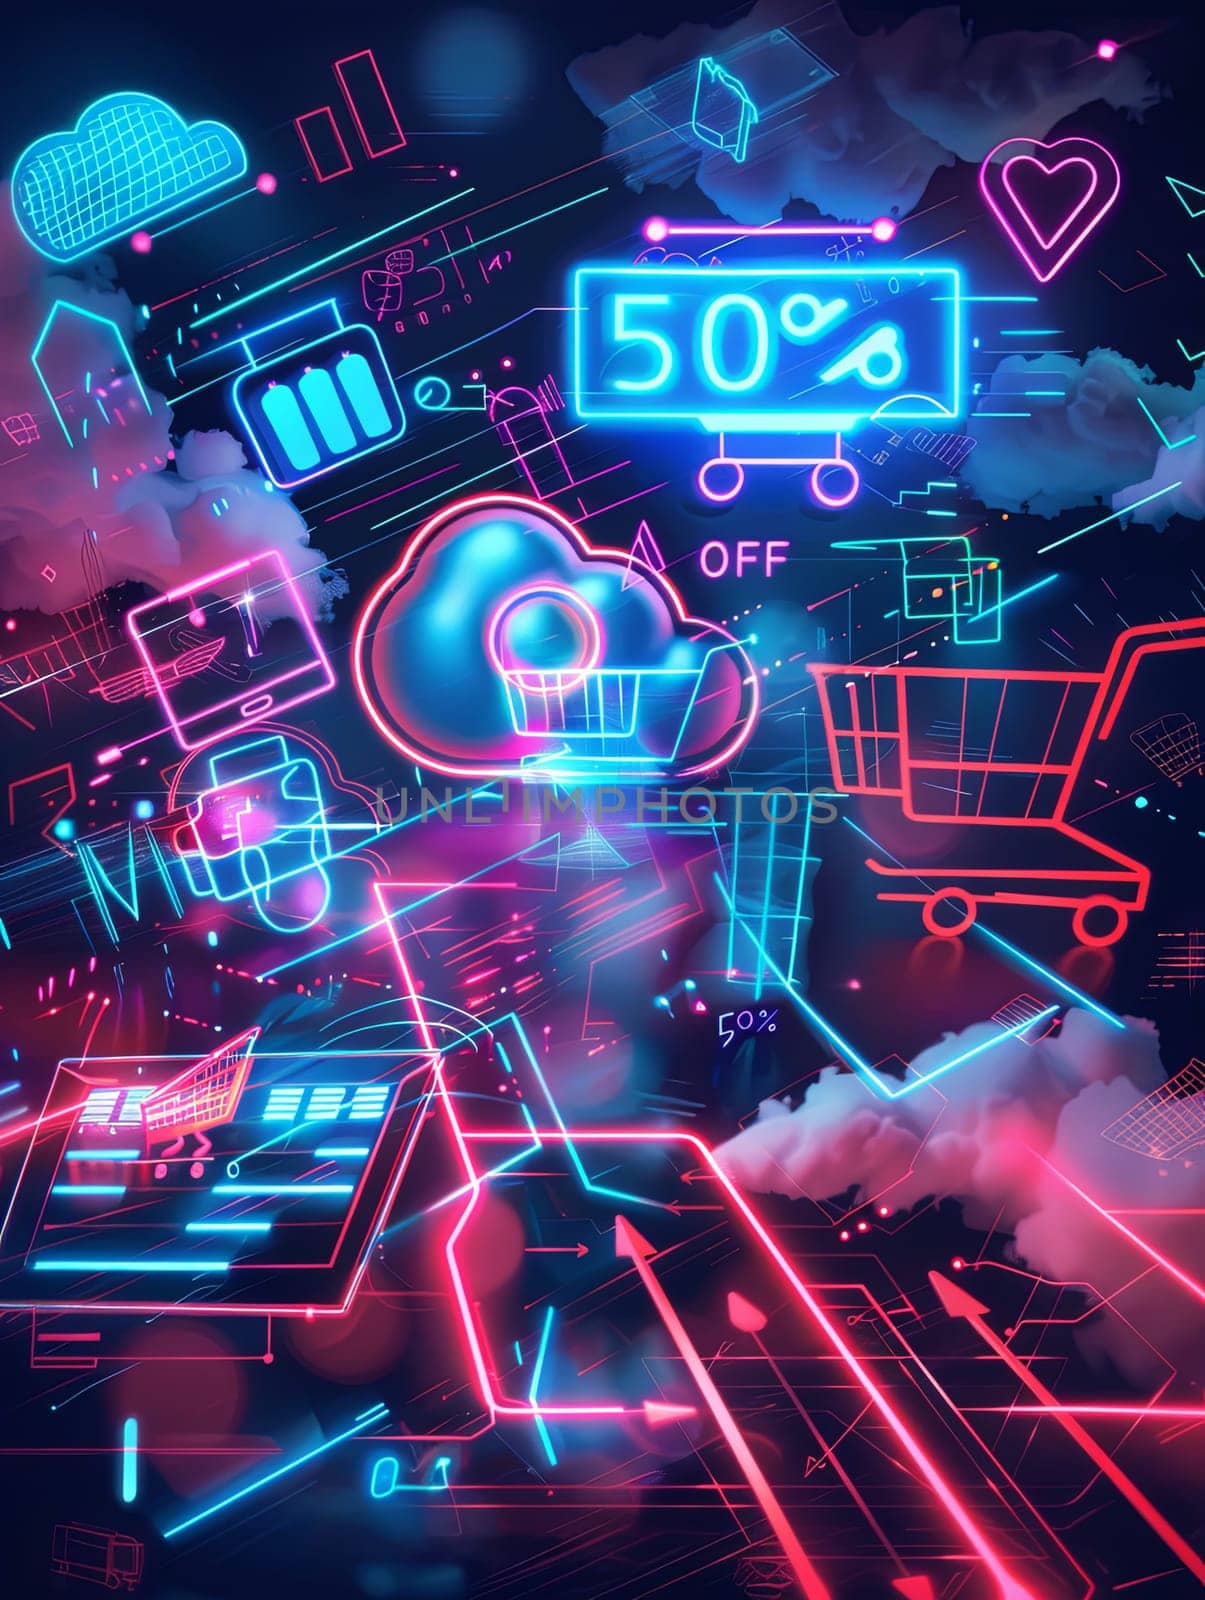 An abstract background with neon glowing digital shopping carts, product icons, and a bold 50% OFF sign.